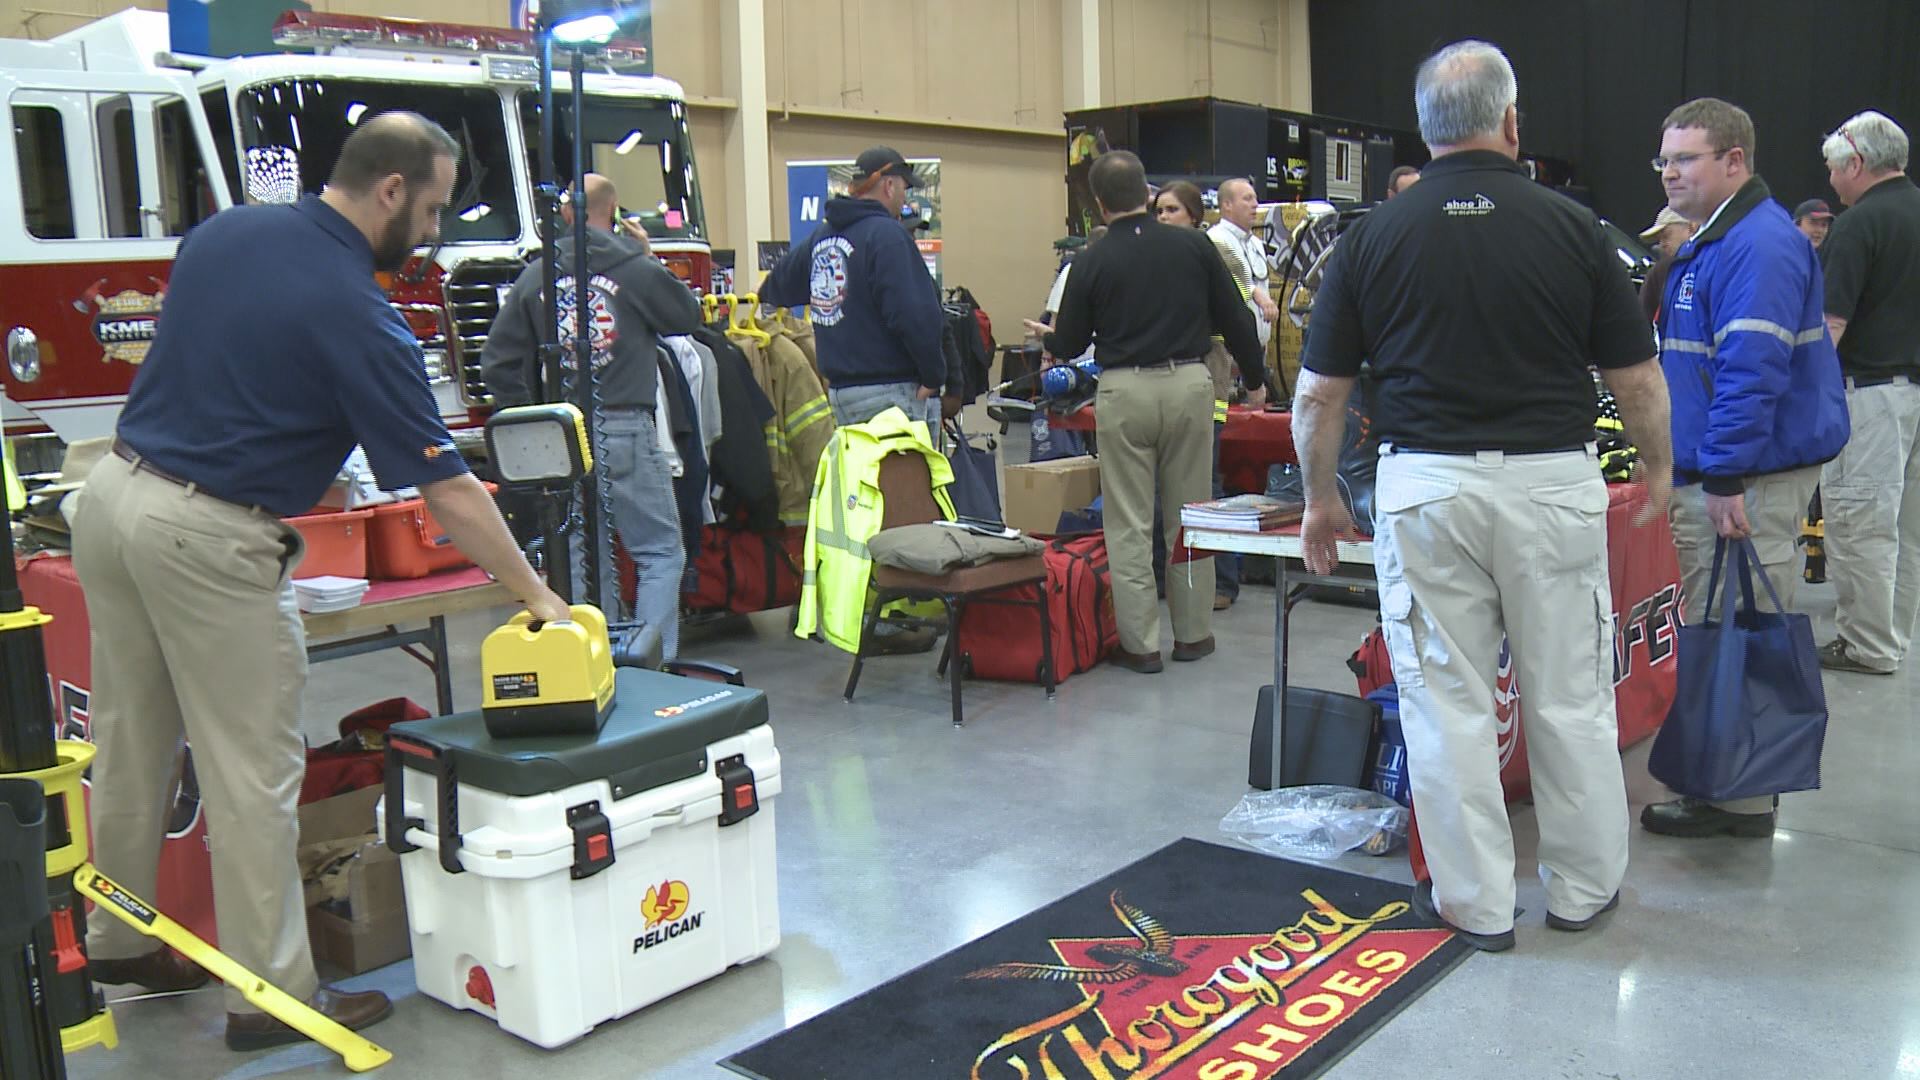 700 firefighters learning new techniques at East TN expo